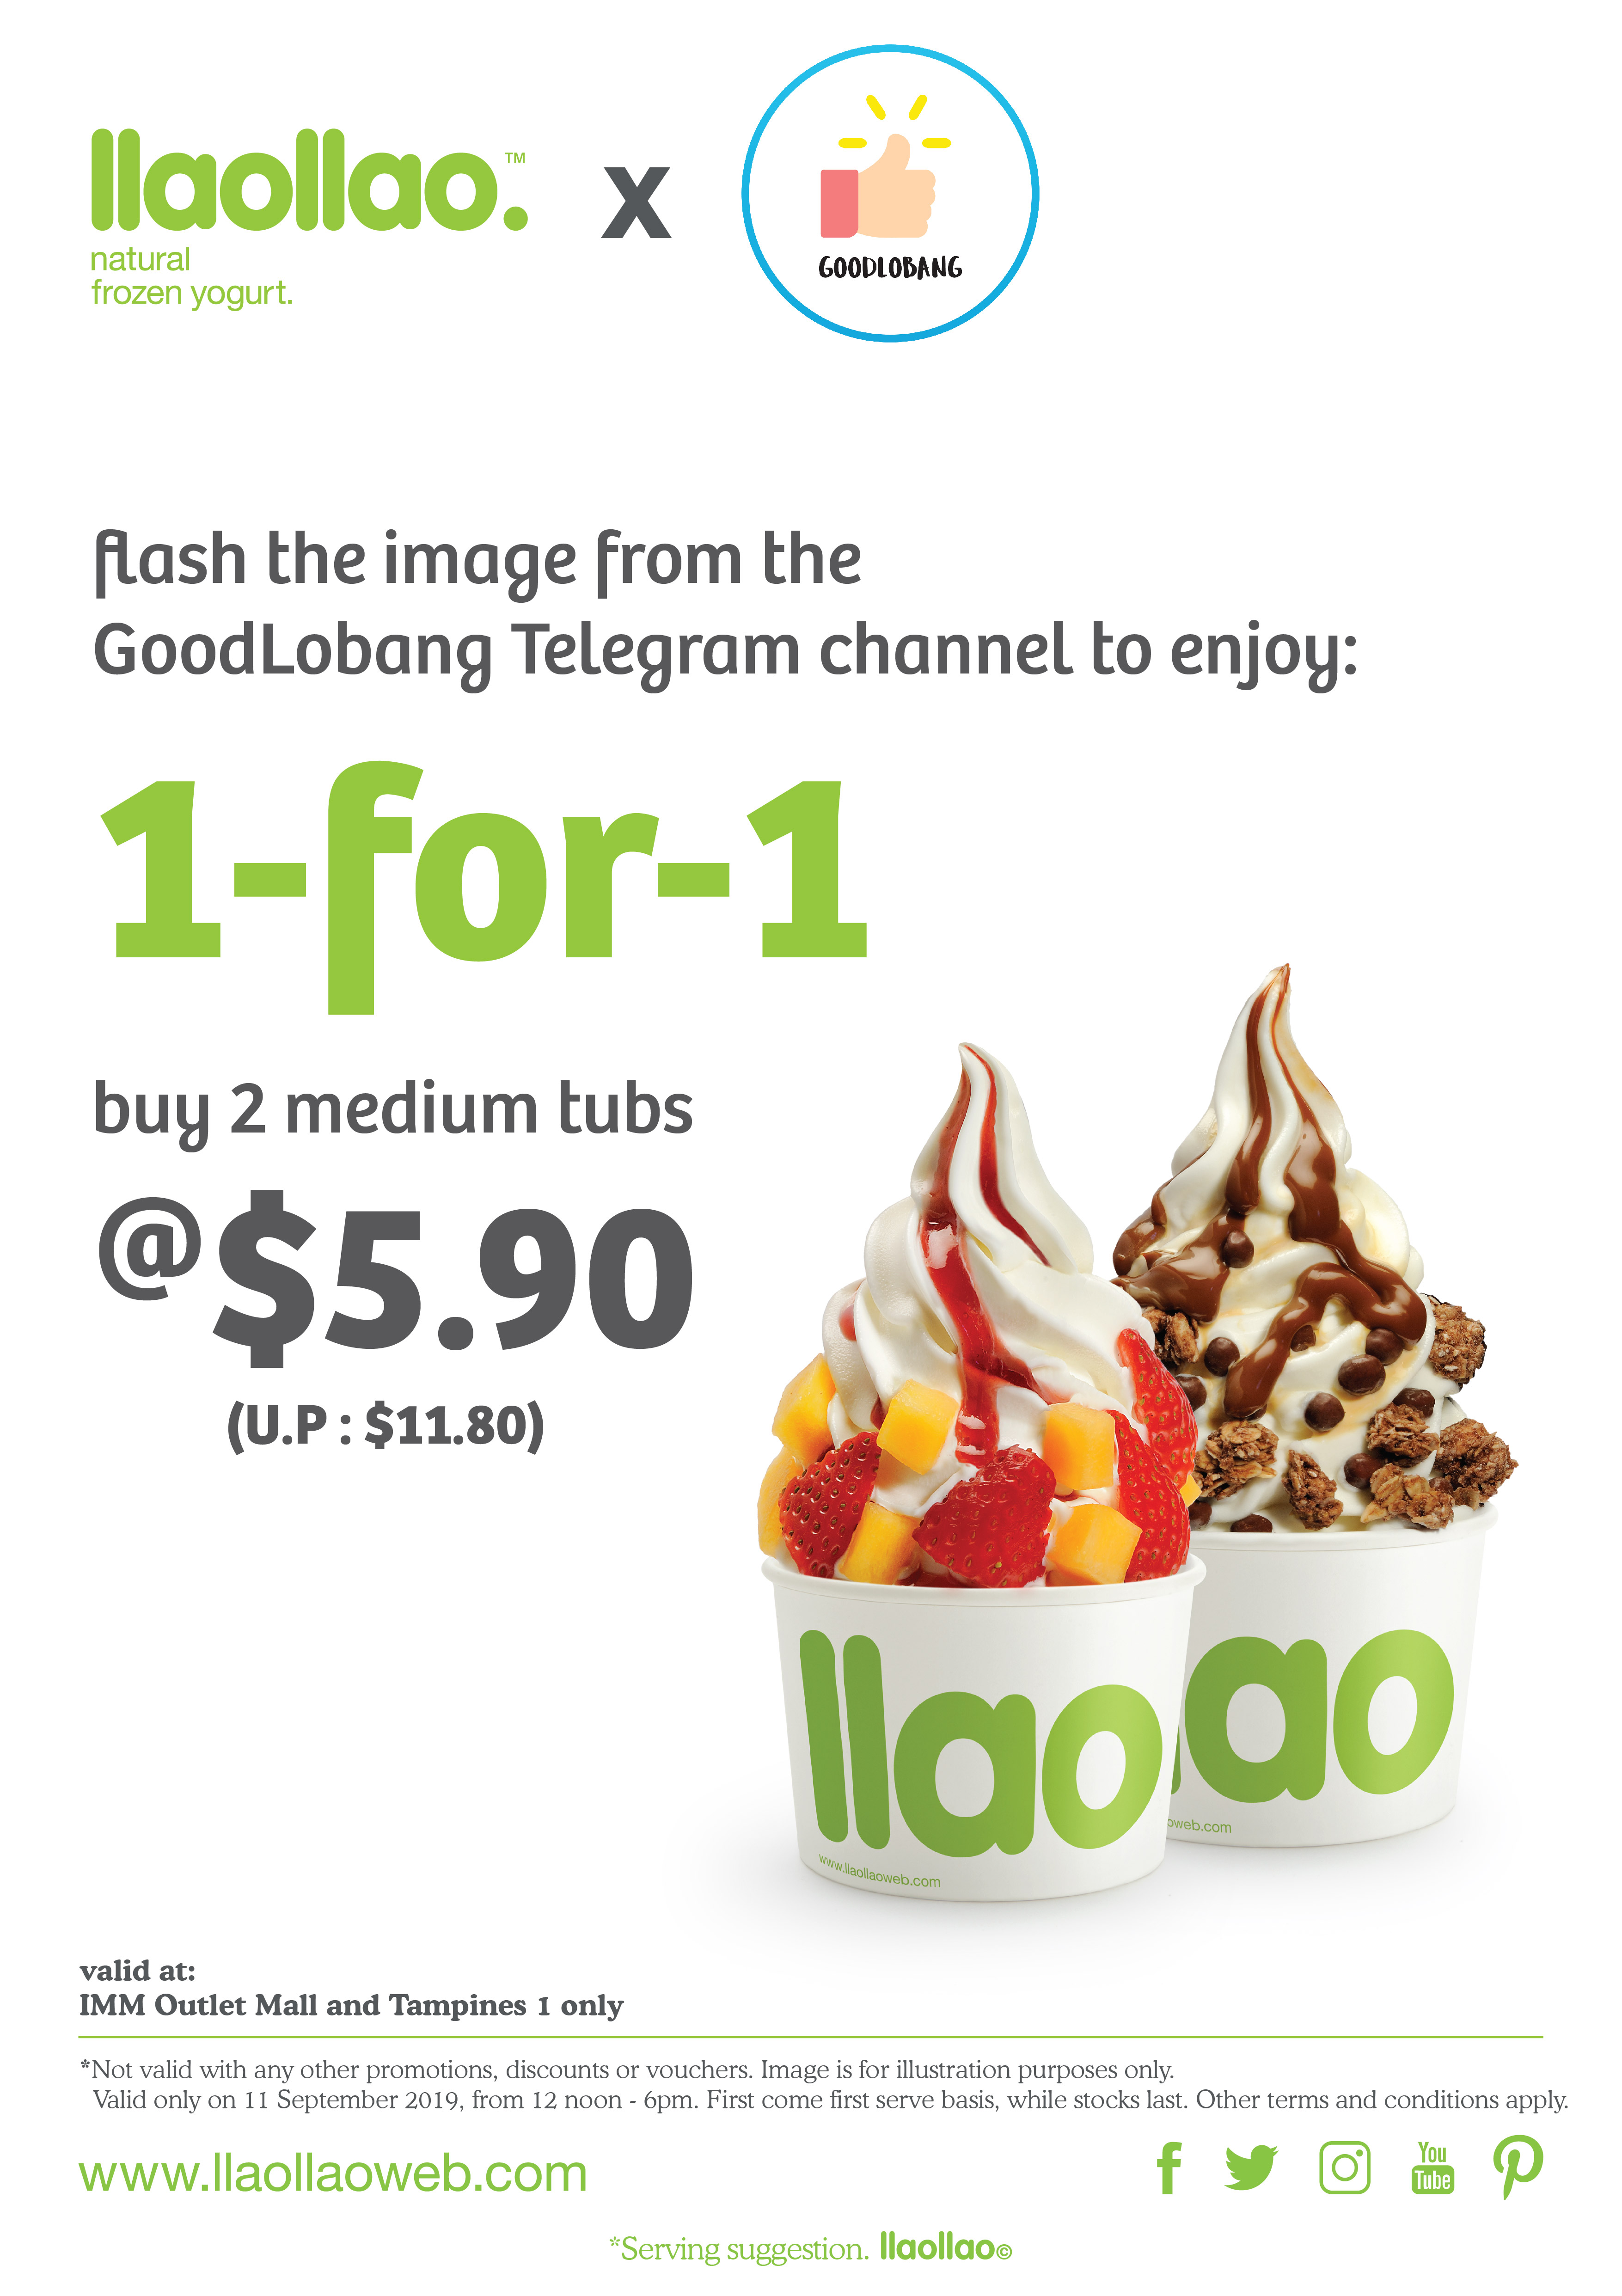 llaollao will be offering 1-for-1 Medium Tubs at $5.90 (U.P. $11.80) on 11 Sep 19 - 1